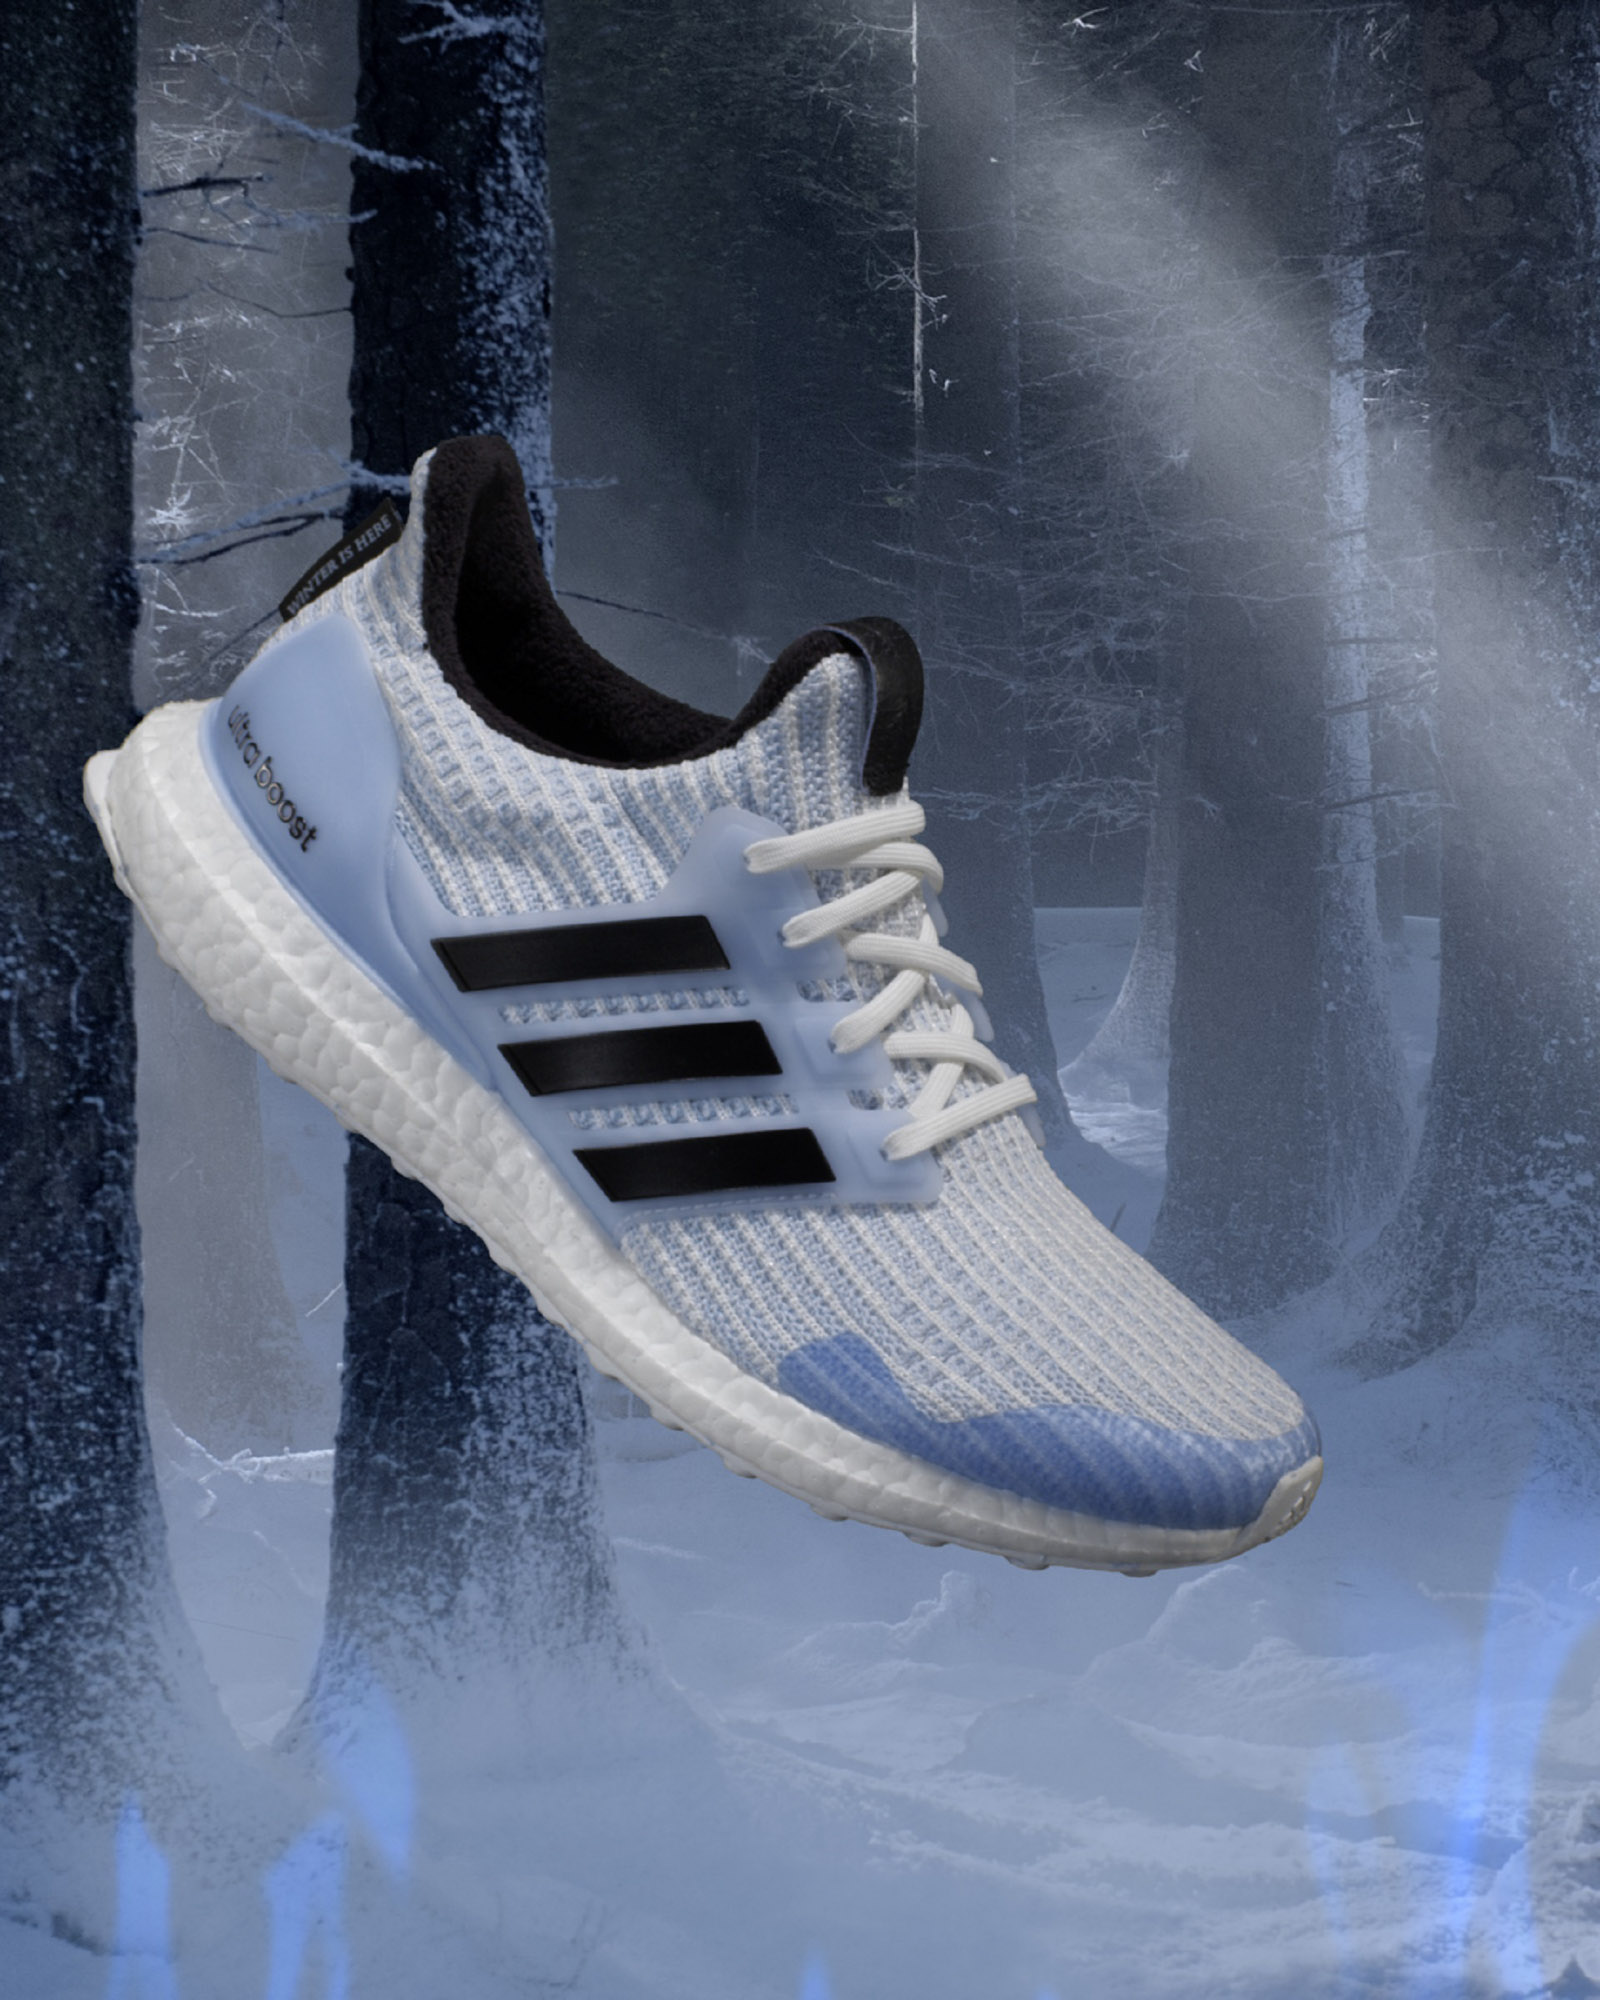 Game of Thrones x adidas UltraBOOST 2